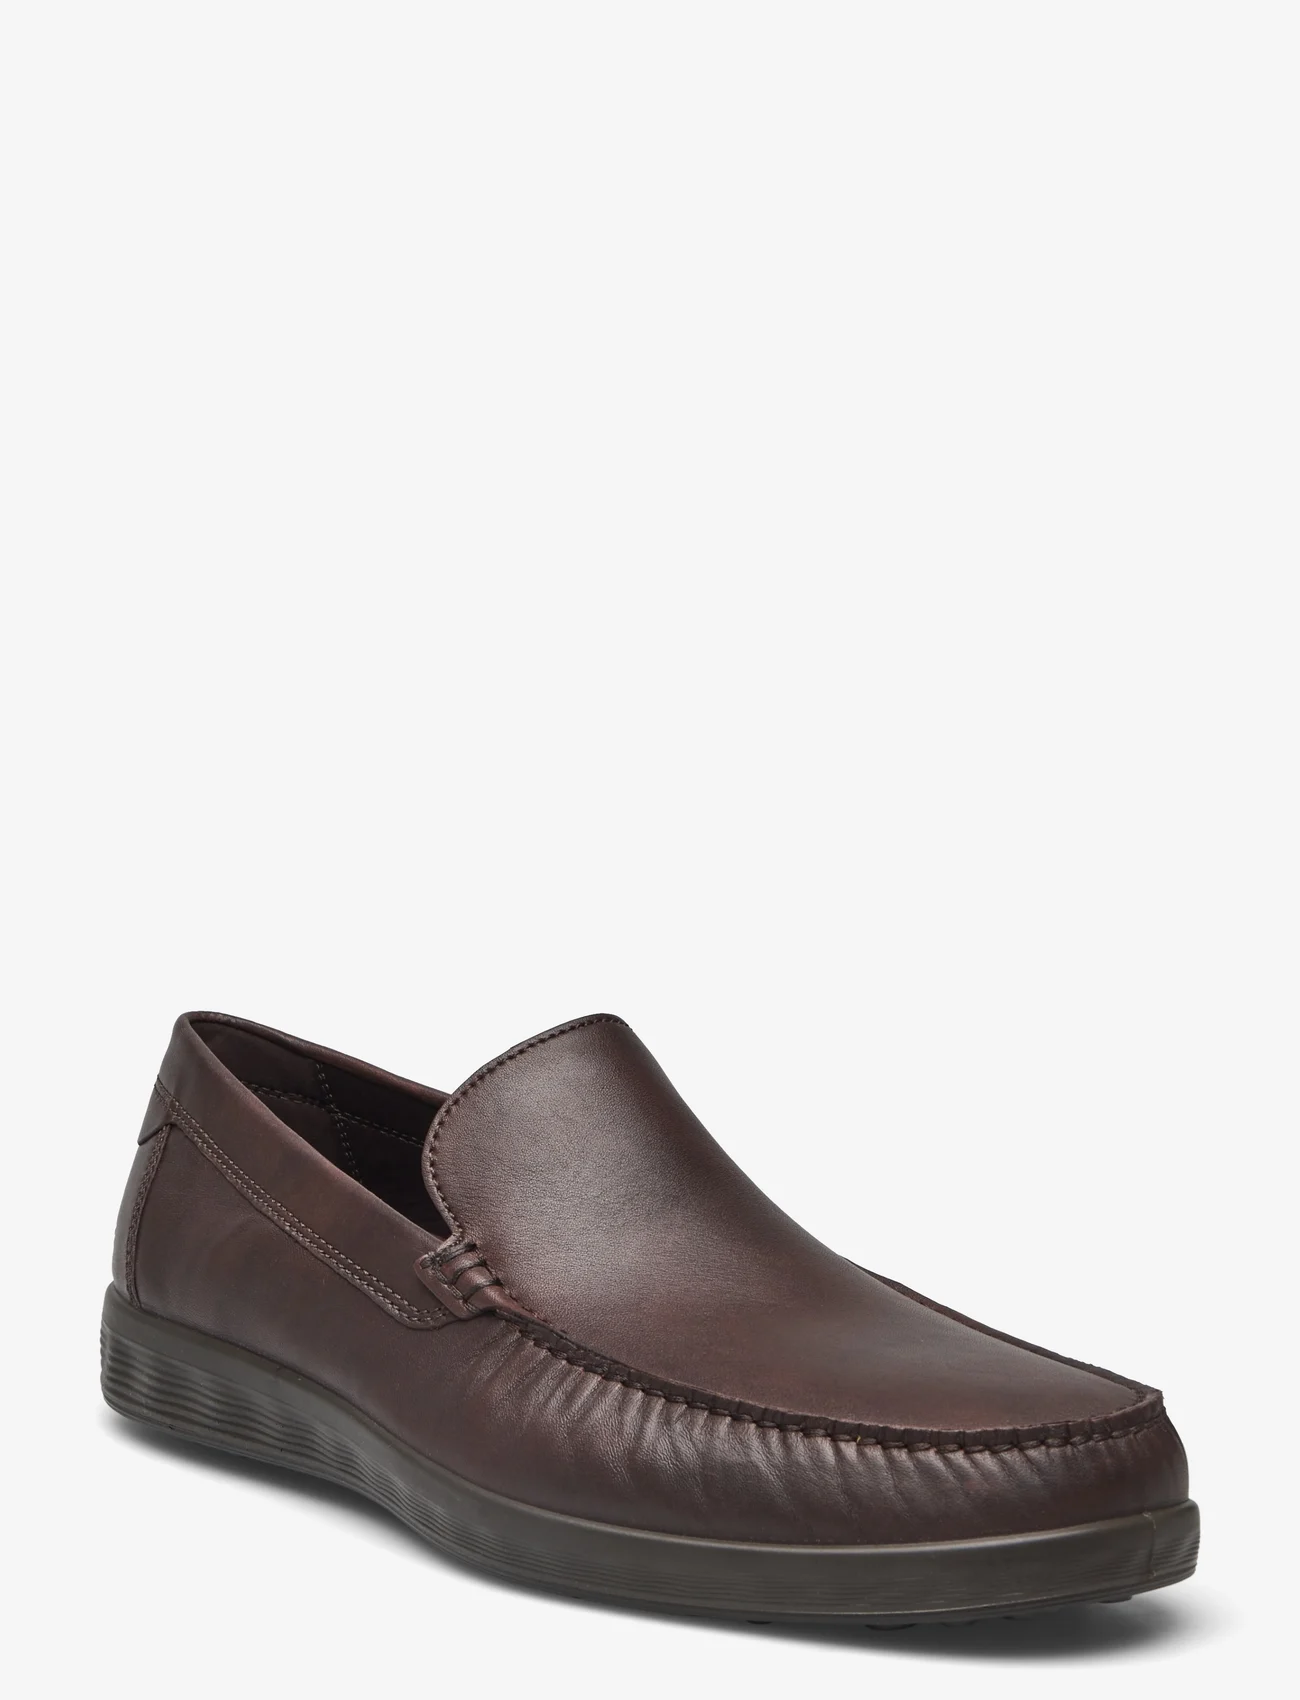 ECCO - S LITE MOC M - spring shoes - cocoa brown - 0